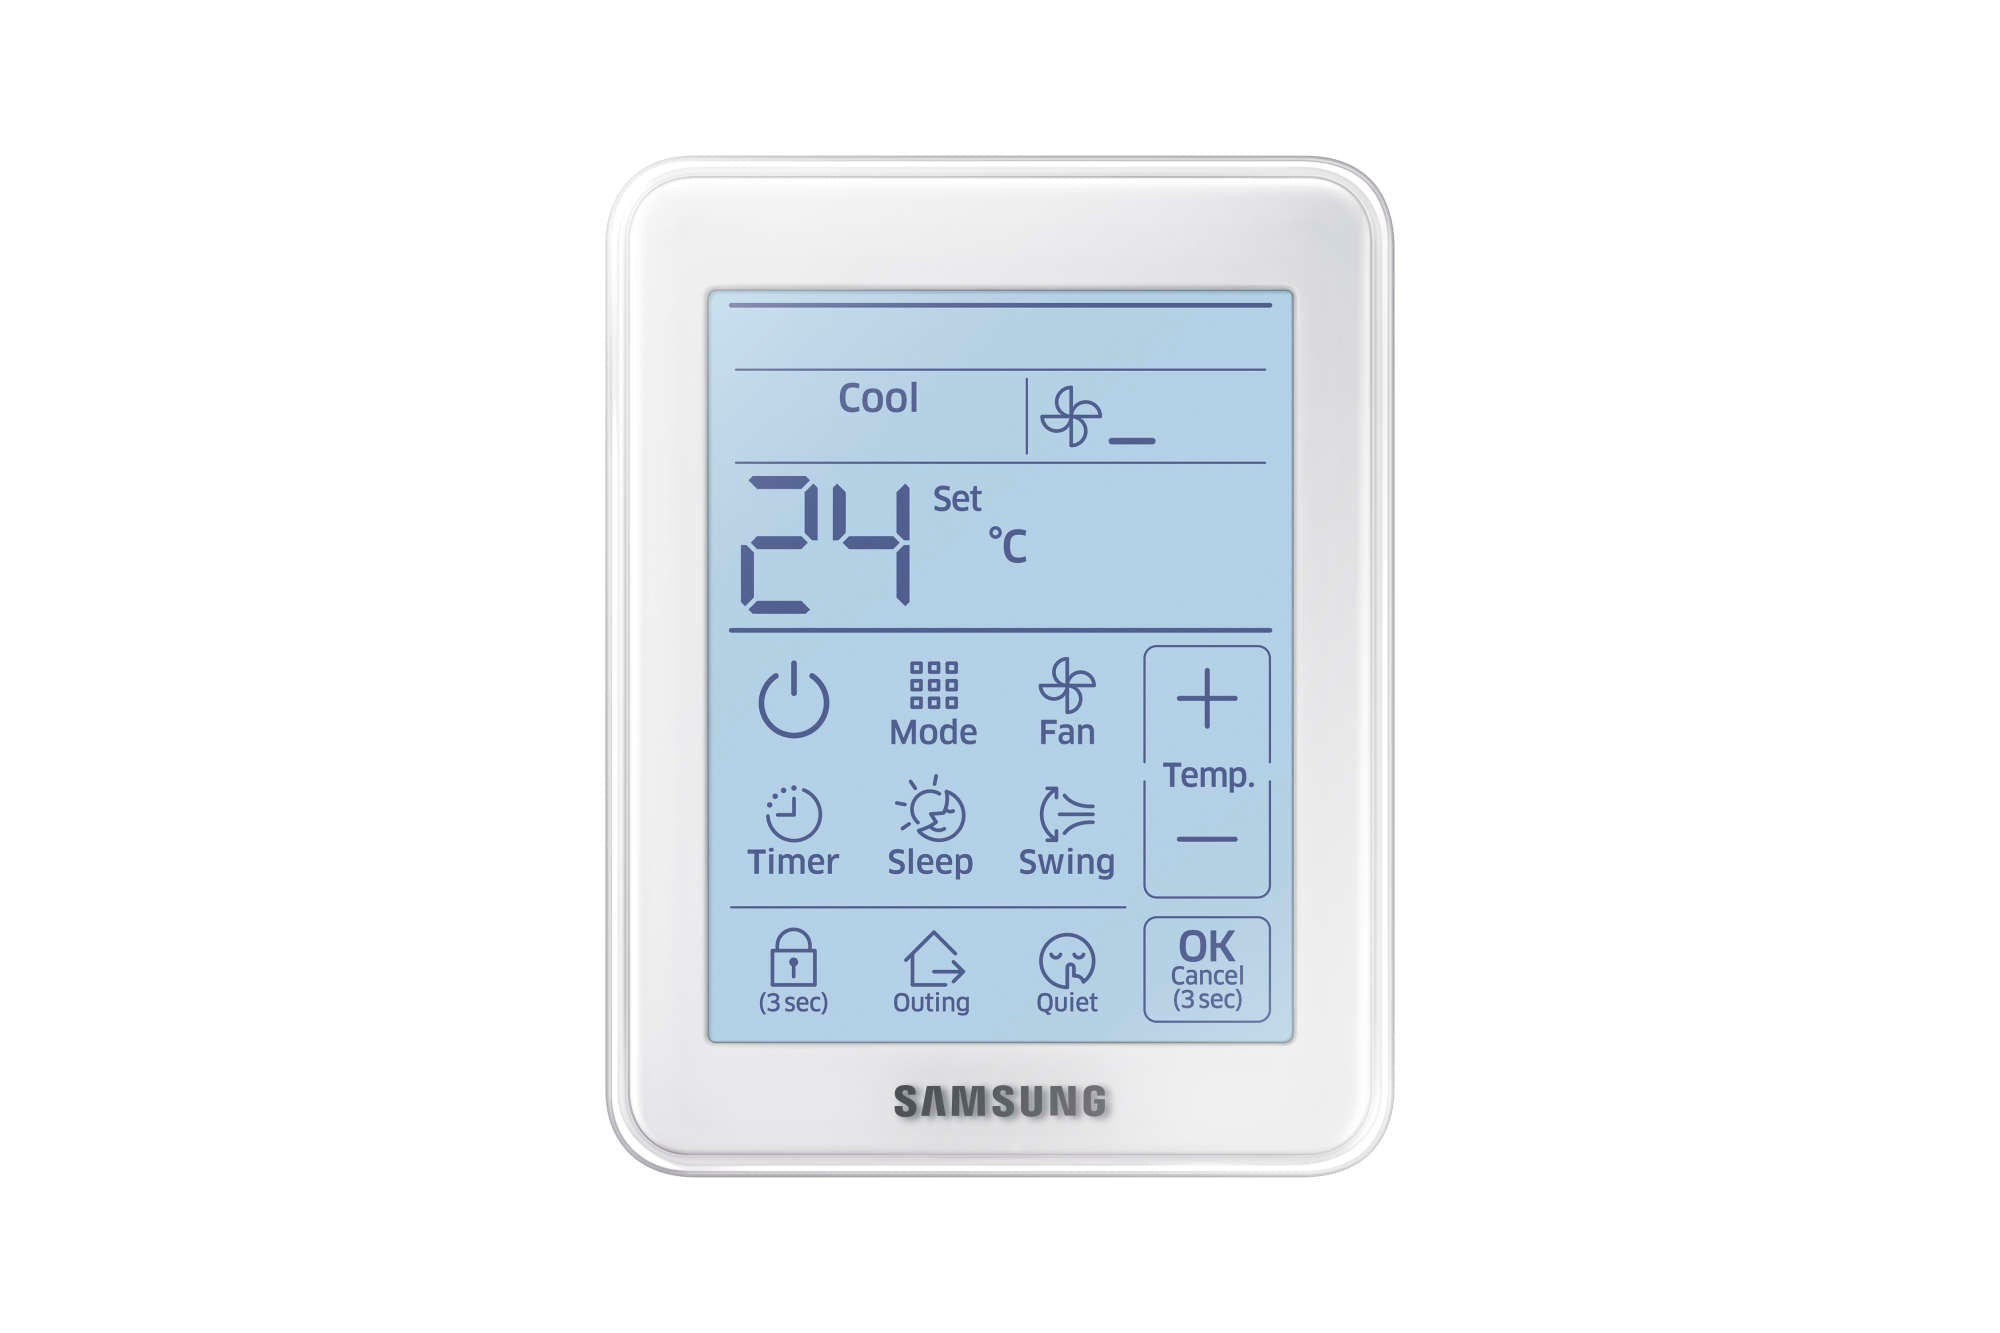 Samsung MWRSH10N Air Conditioner Simple Smart Touch Controller - Samsung Parts USA